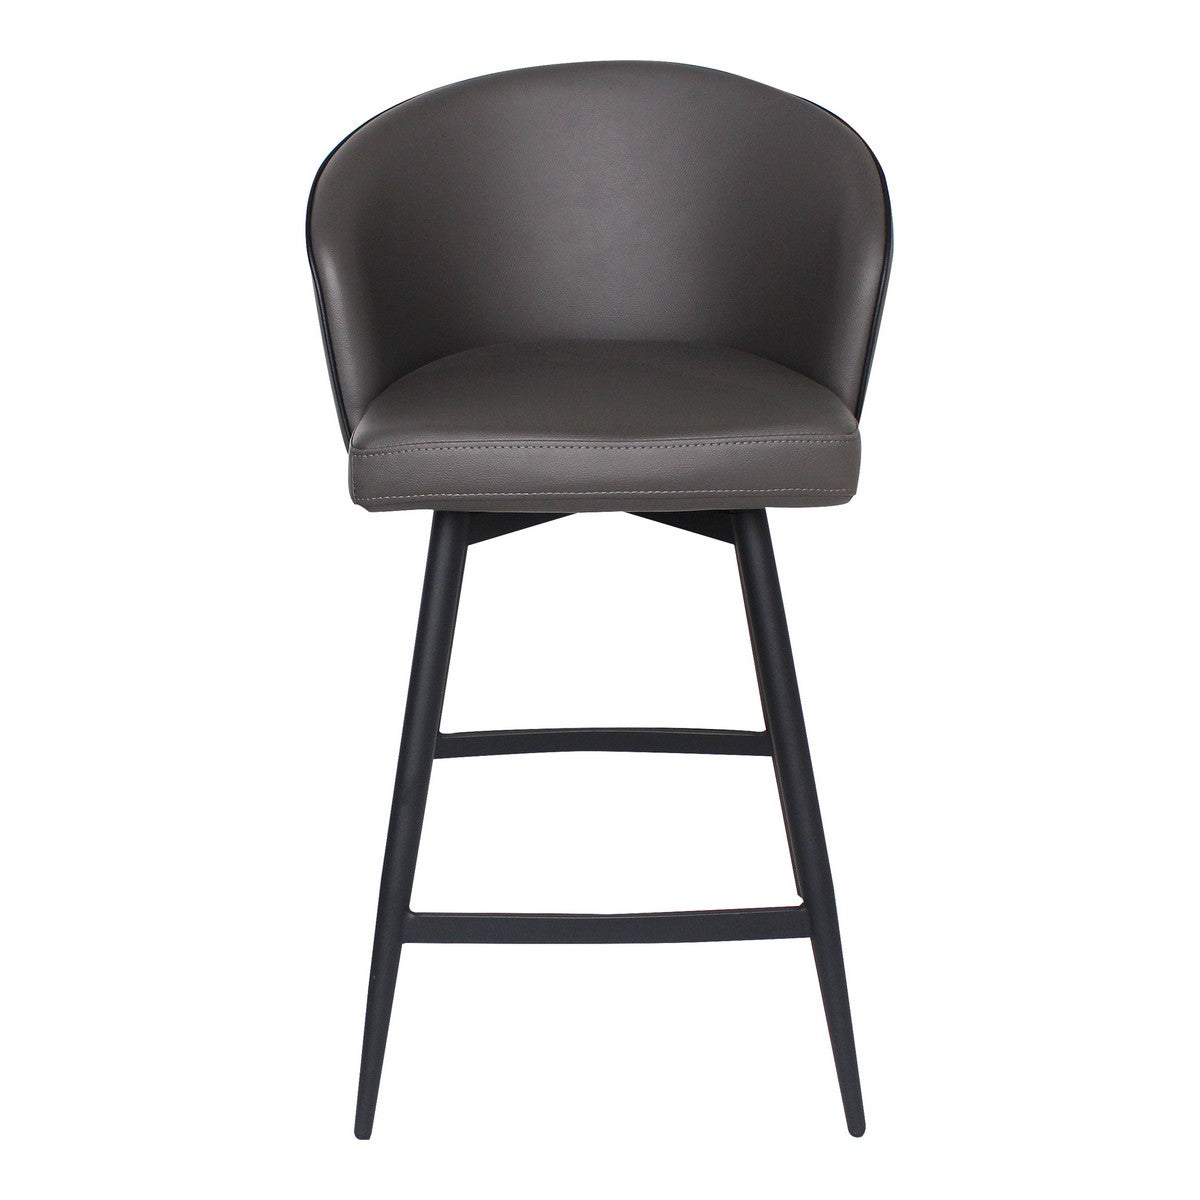 Moe's Home Collection Webber Swivel Counter Stool Charcoal - UU-1004-07 - Moe's Home Collection - Counter Stools - Minimal And Modern - 1